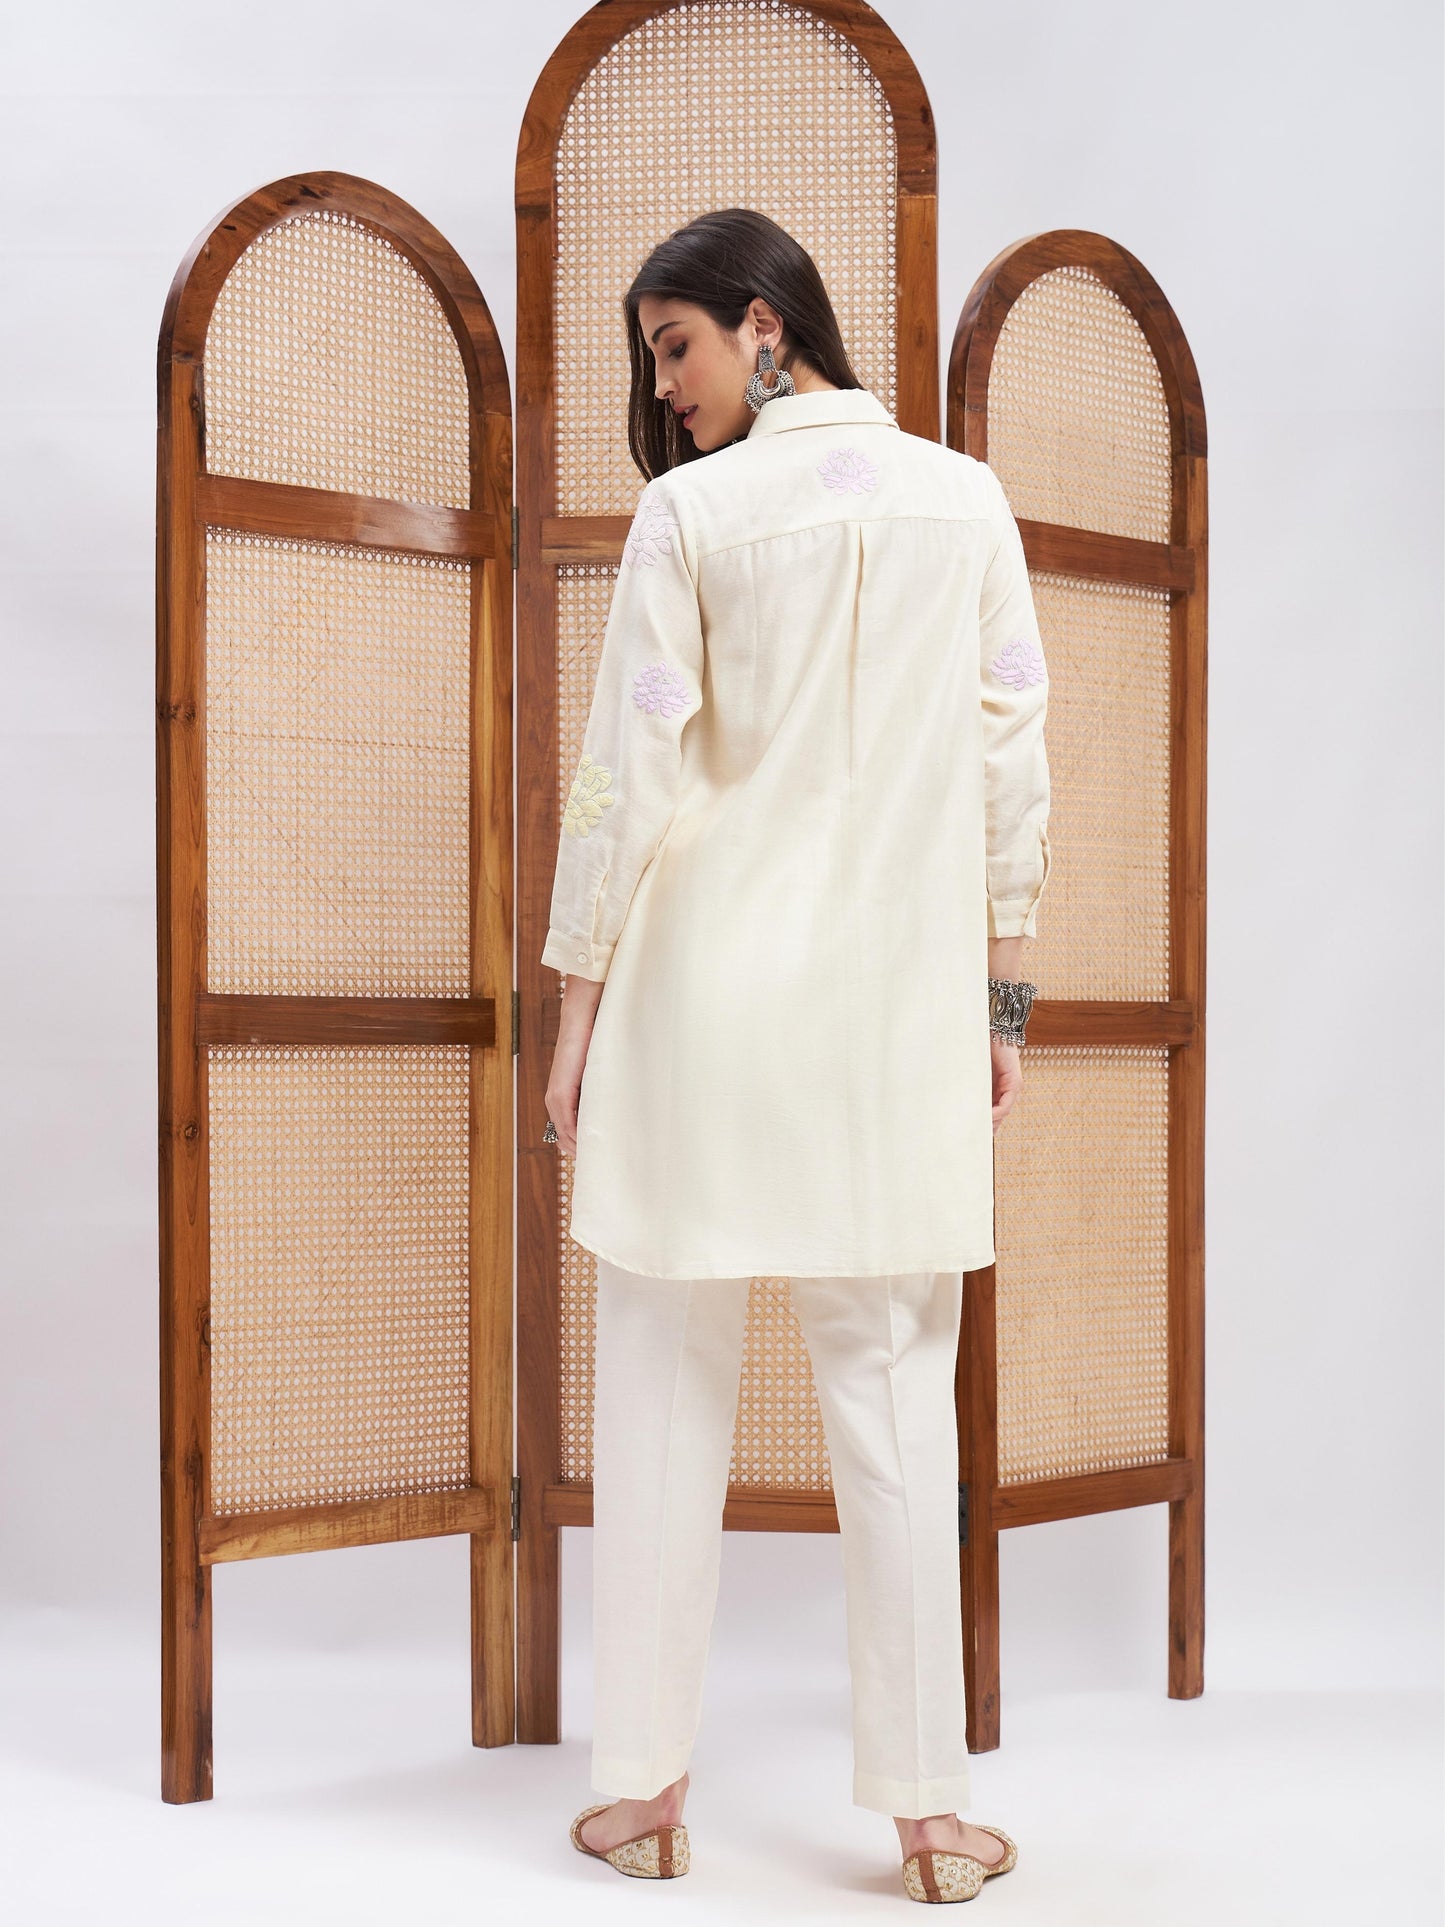 Off-White Resham Embroidered Kurta Set at Kamakhyaa by RoohbyRidhimaa. This item is Cotton Mulmul, Kurta Sets, Off-white, Office Wear, Relaxed Fit, Resham Embroidered, Silk Chanderi, Toxin free